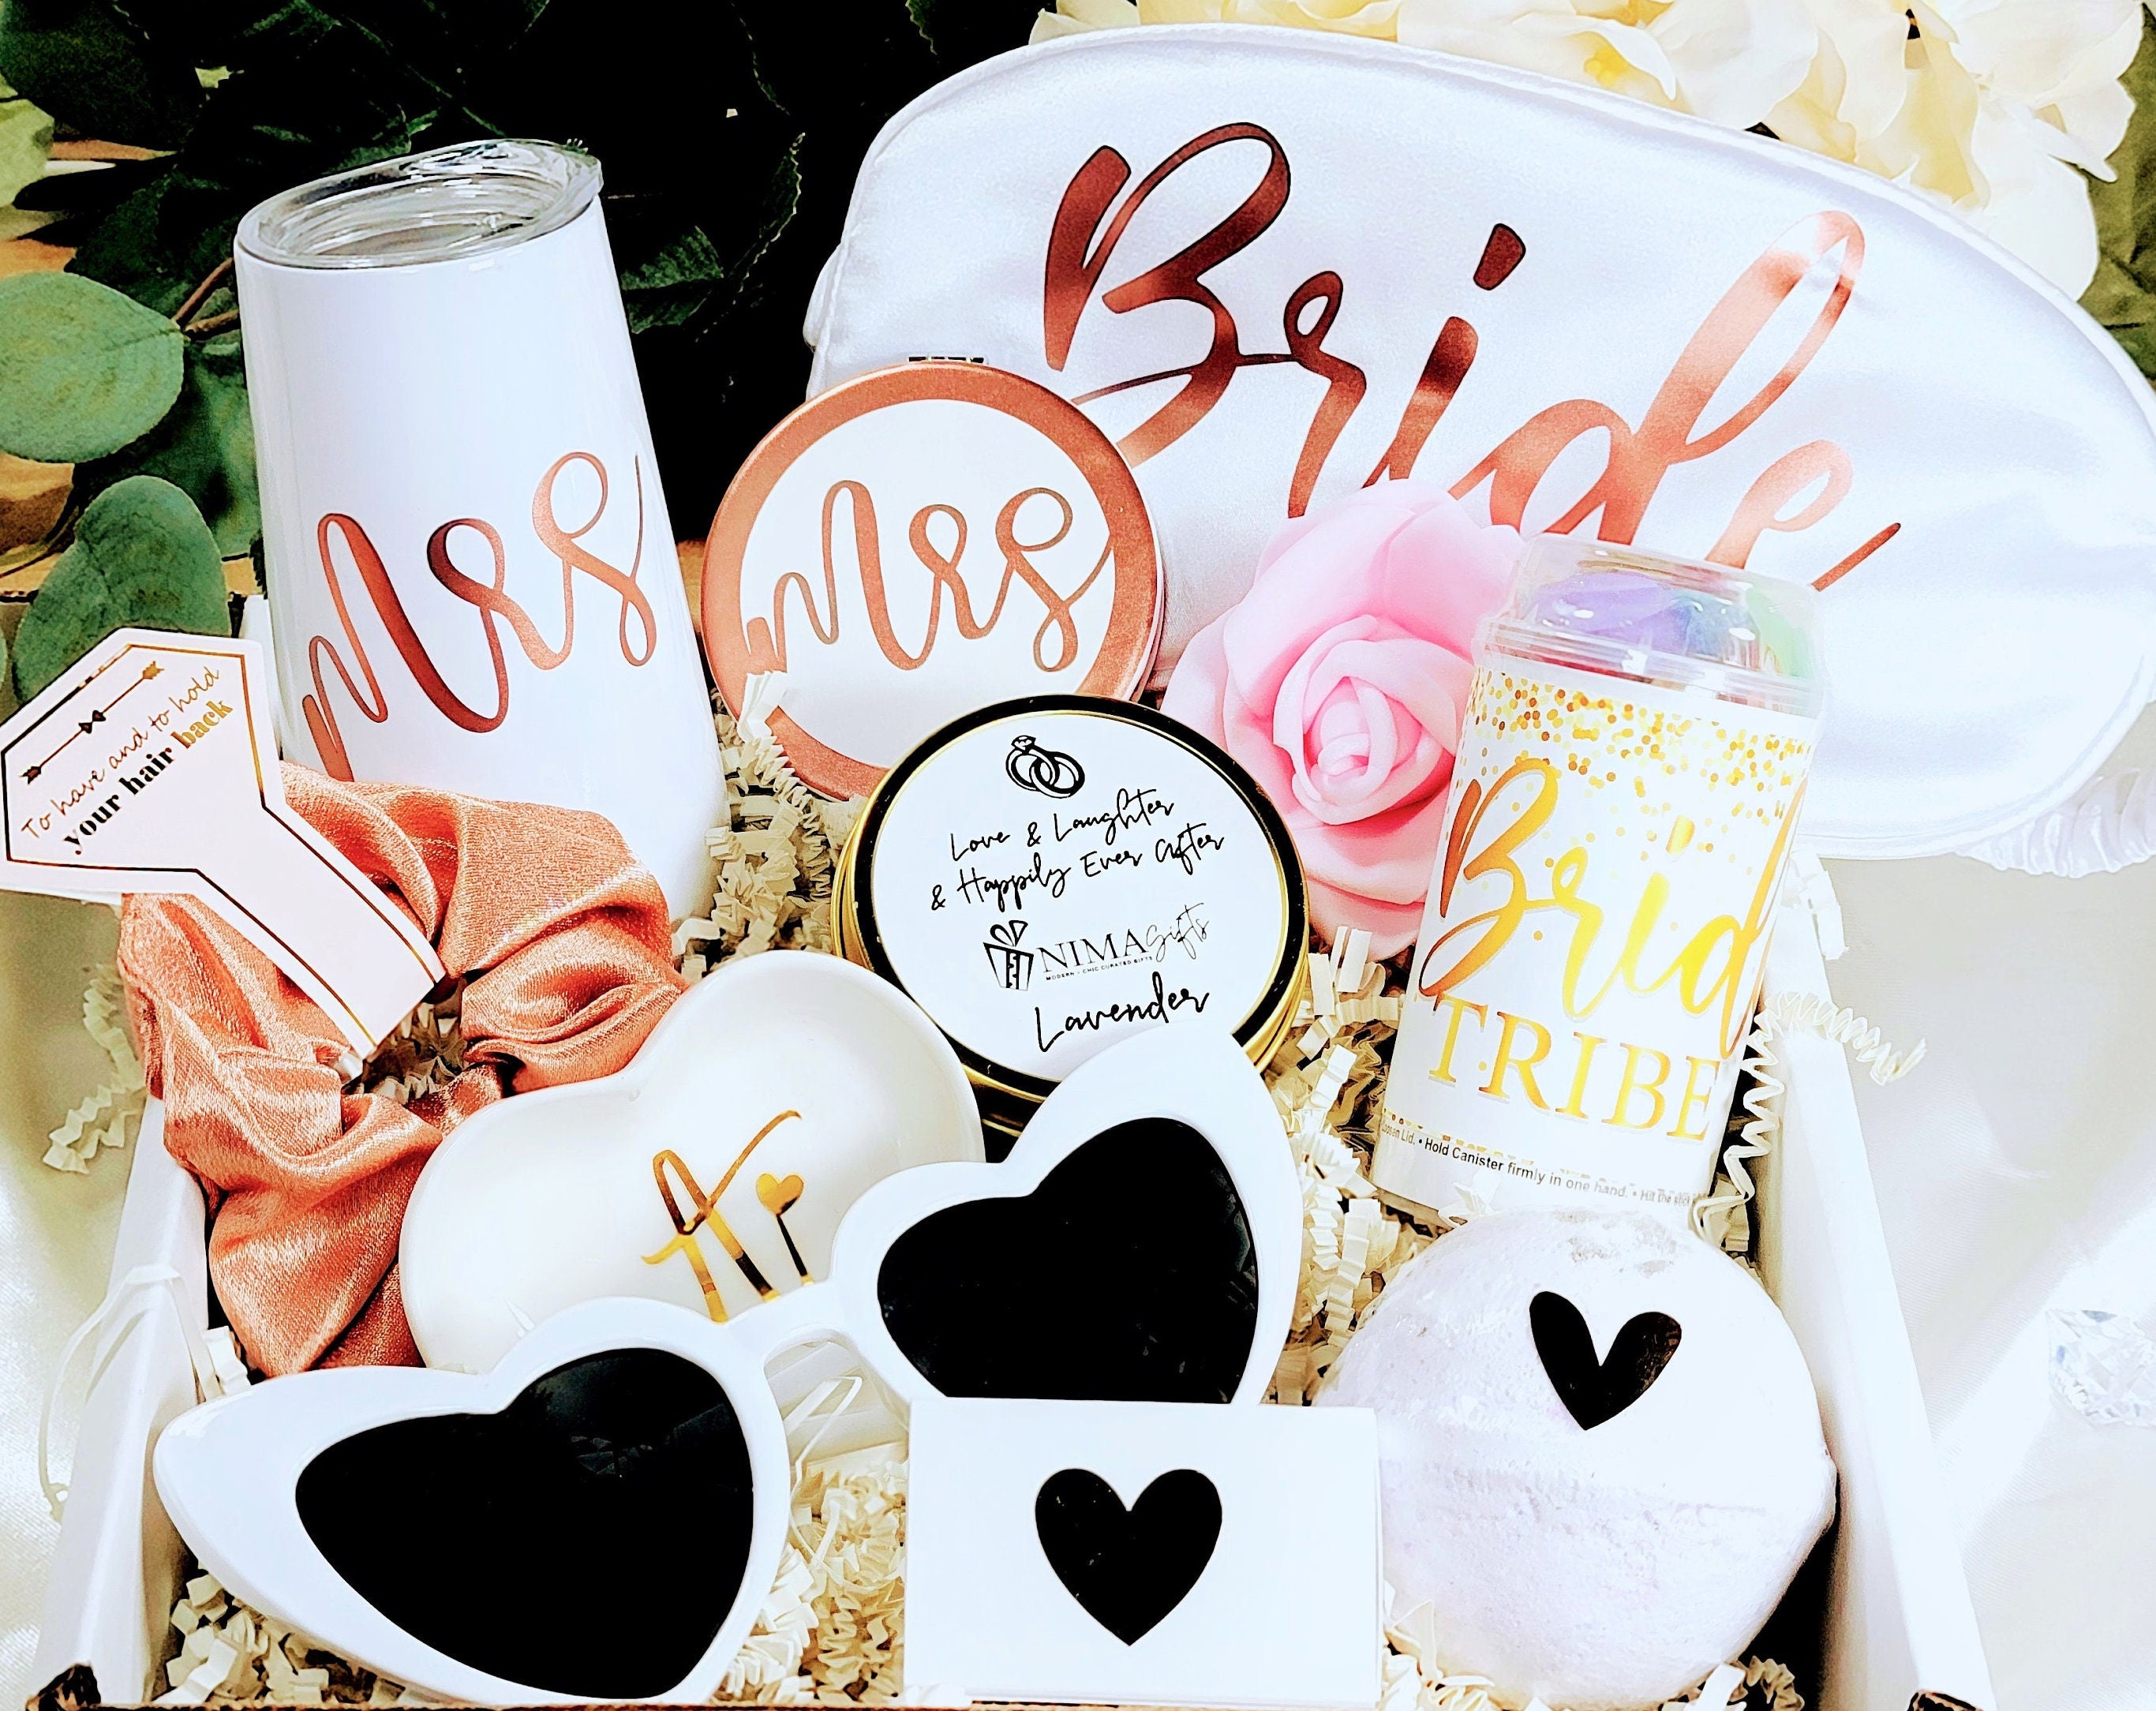 Bride To Be Gifts, Bridal Shower Gift Engagement Gifts for Women